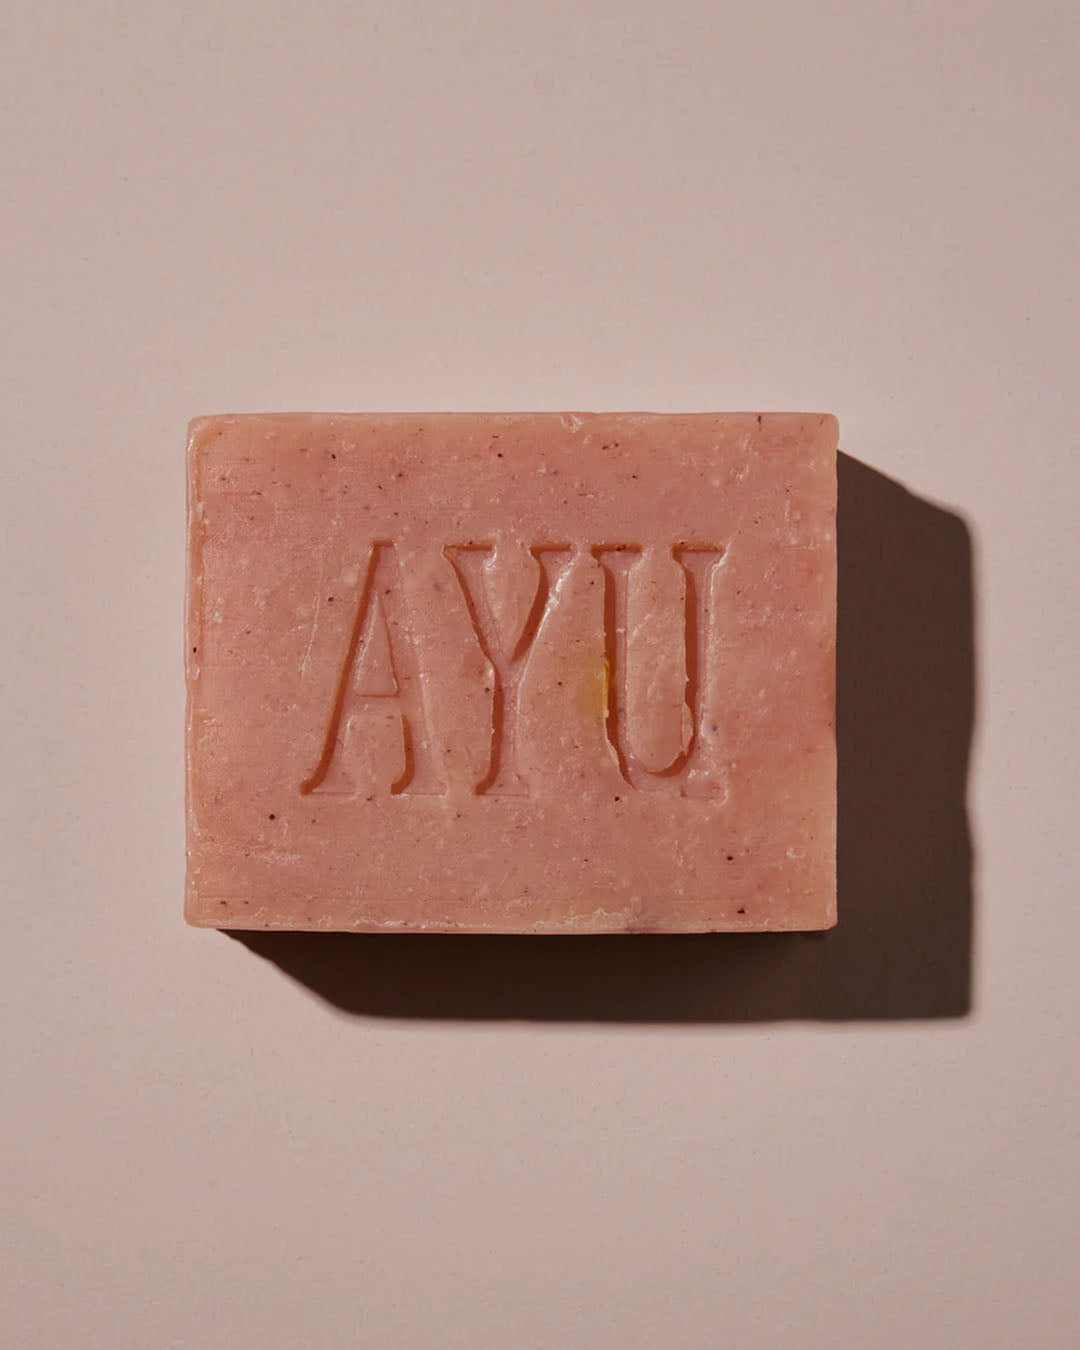 Cold Pressed Soap - The Sacred - Sandalwood Body Washes by Ayu - Prae Store